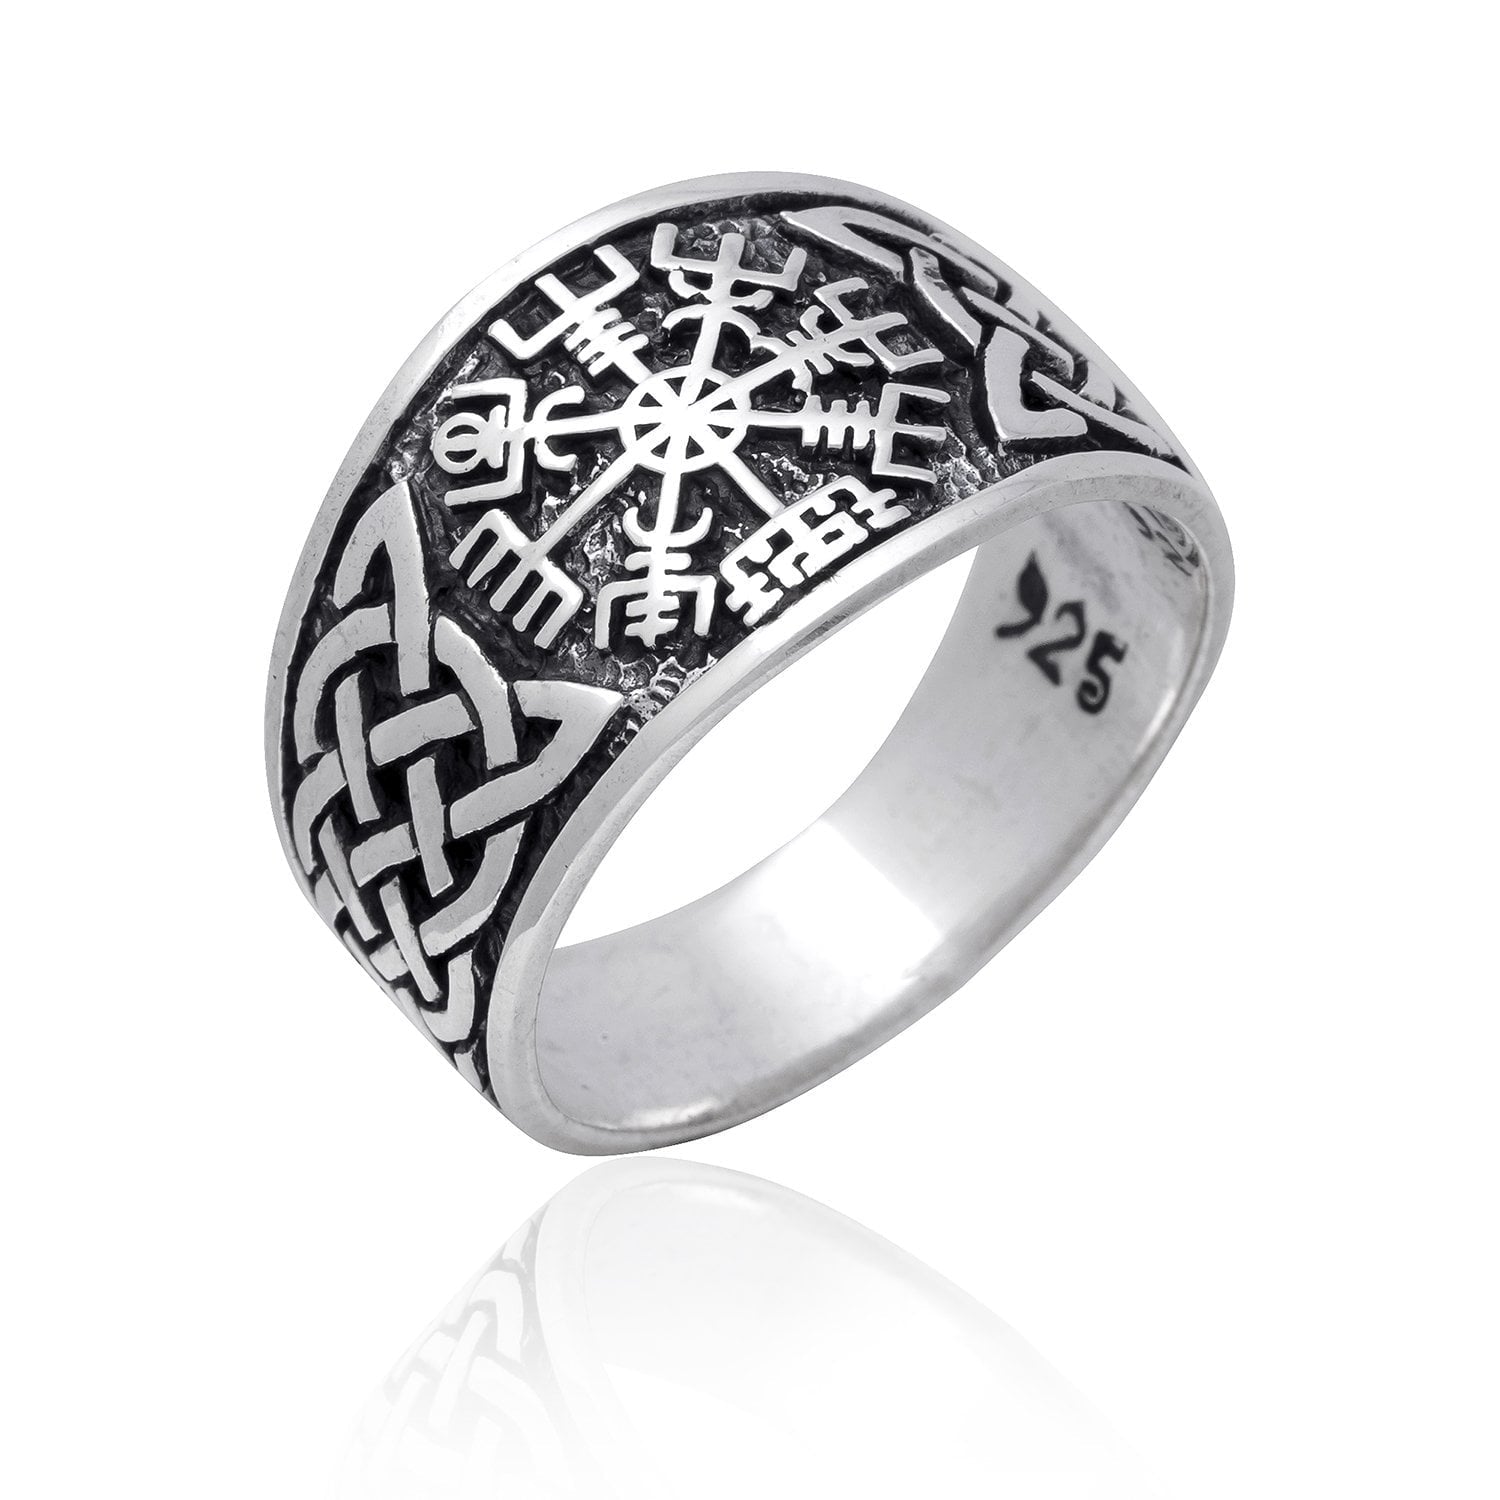 925 Sterling Silver Viking Vegvisir Norse Compass Knotwork Ring - SilverMania925